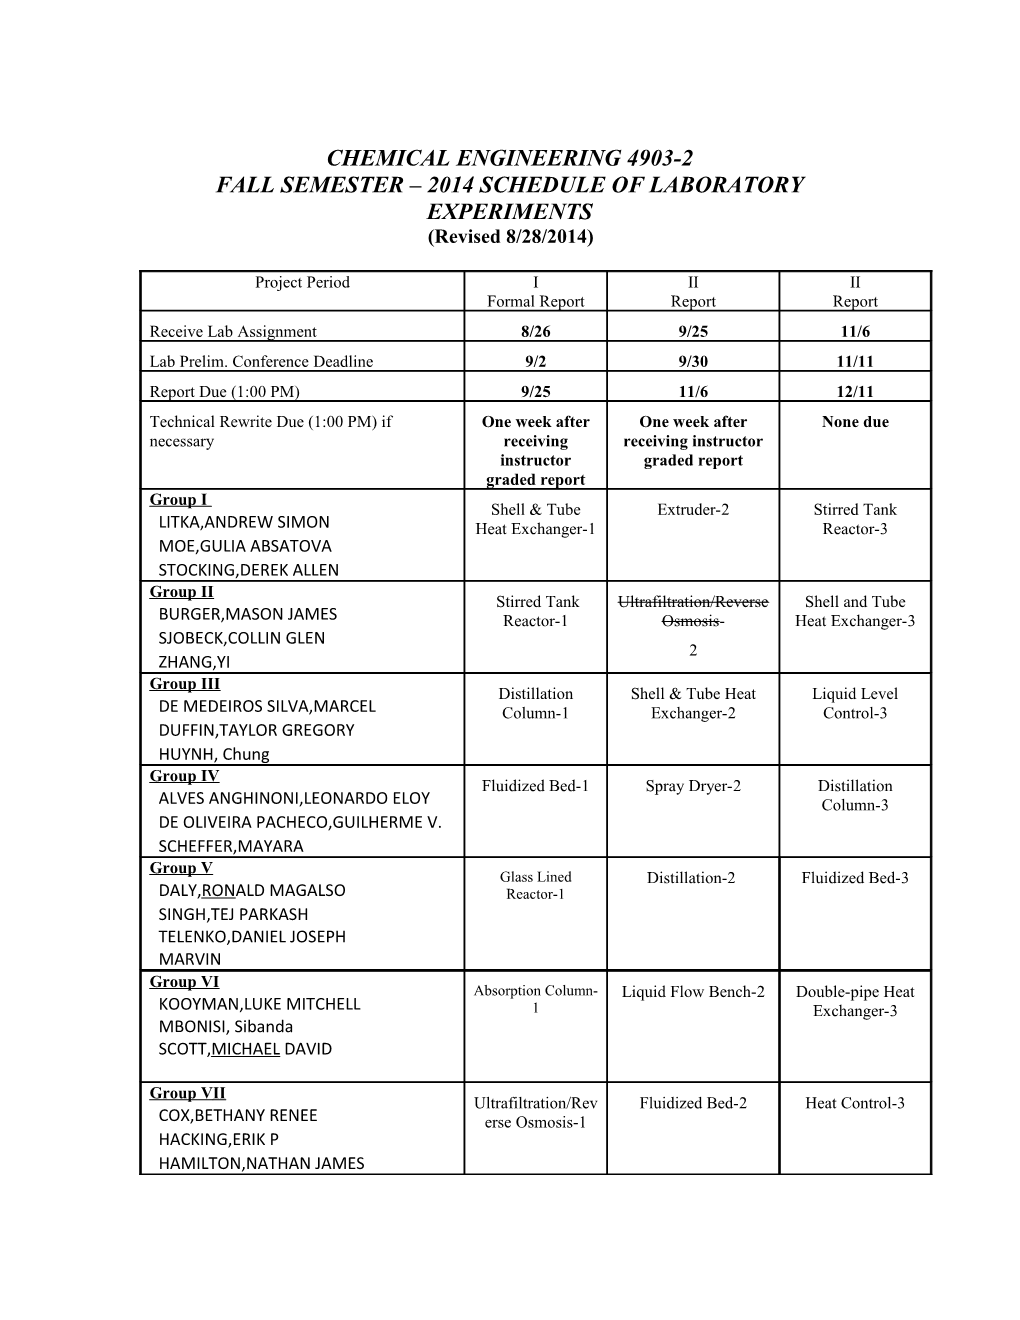 Chemical Engineering 4903-2 Fall Semester 2014Schedule of Laboratory Experiments